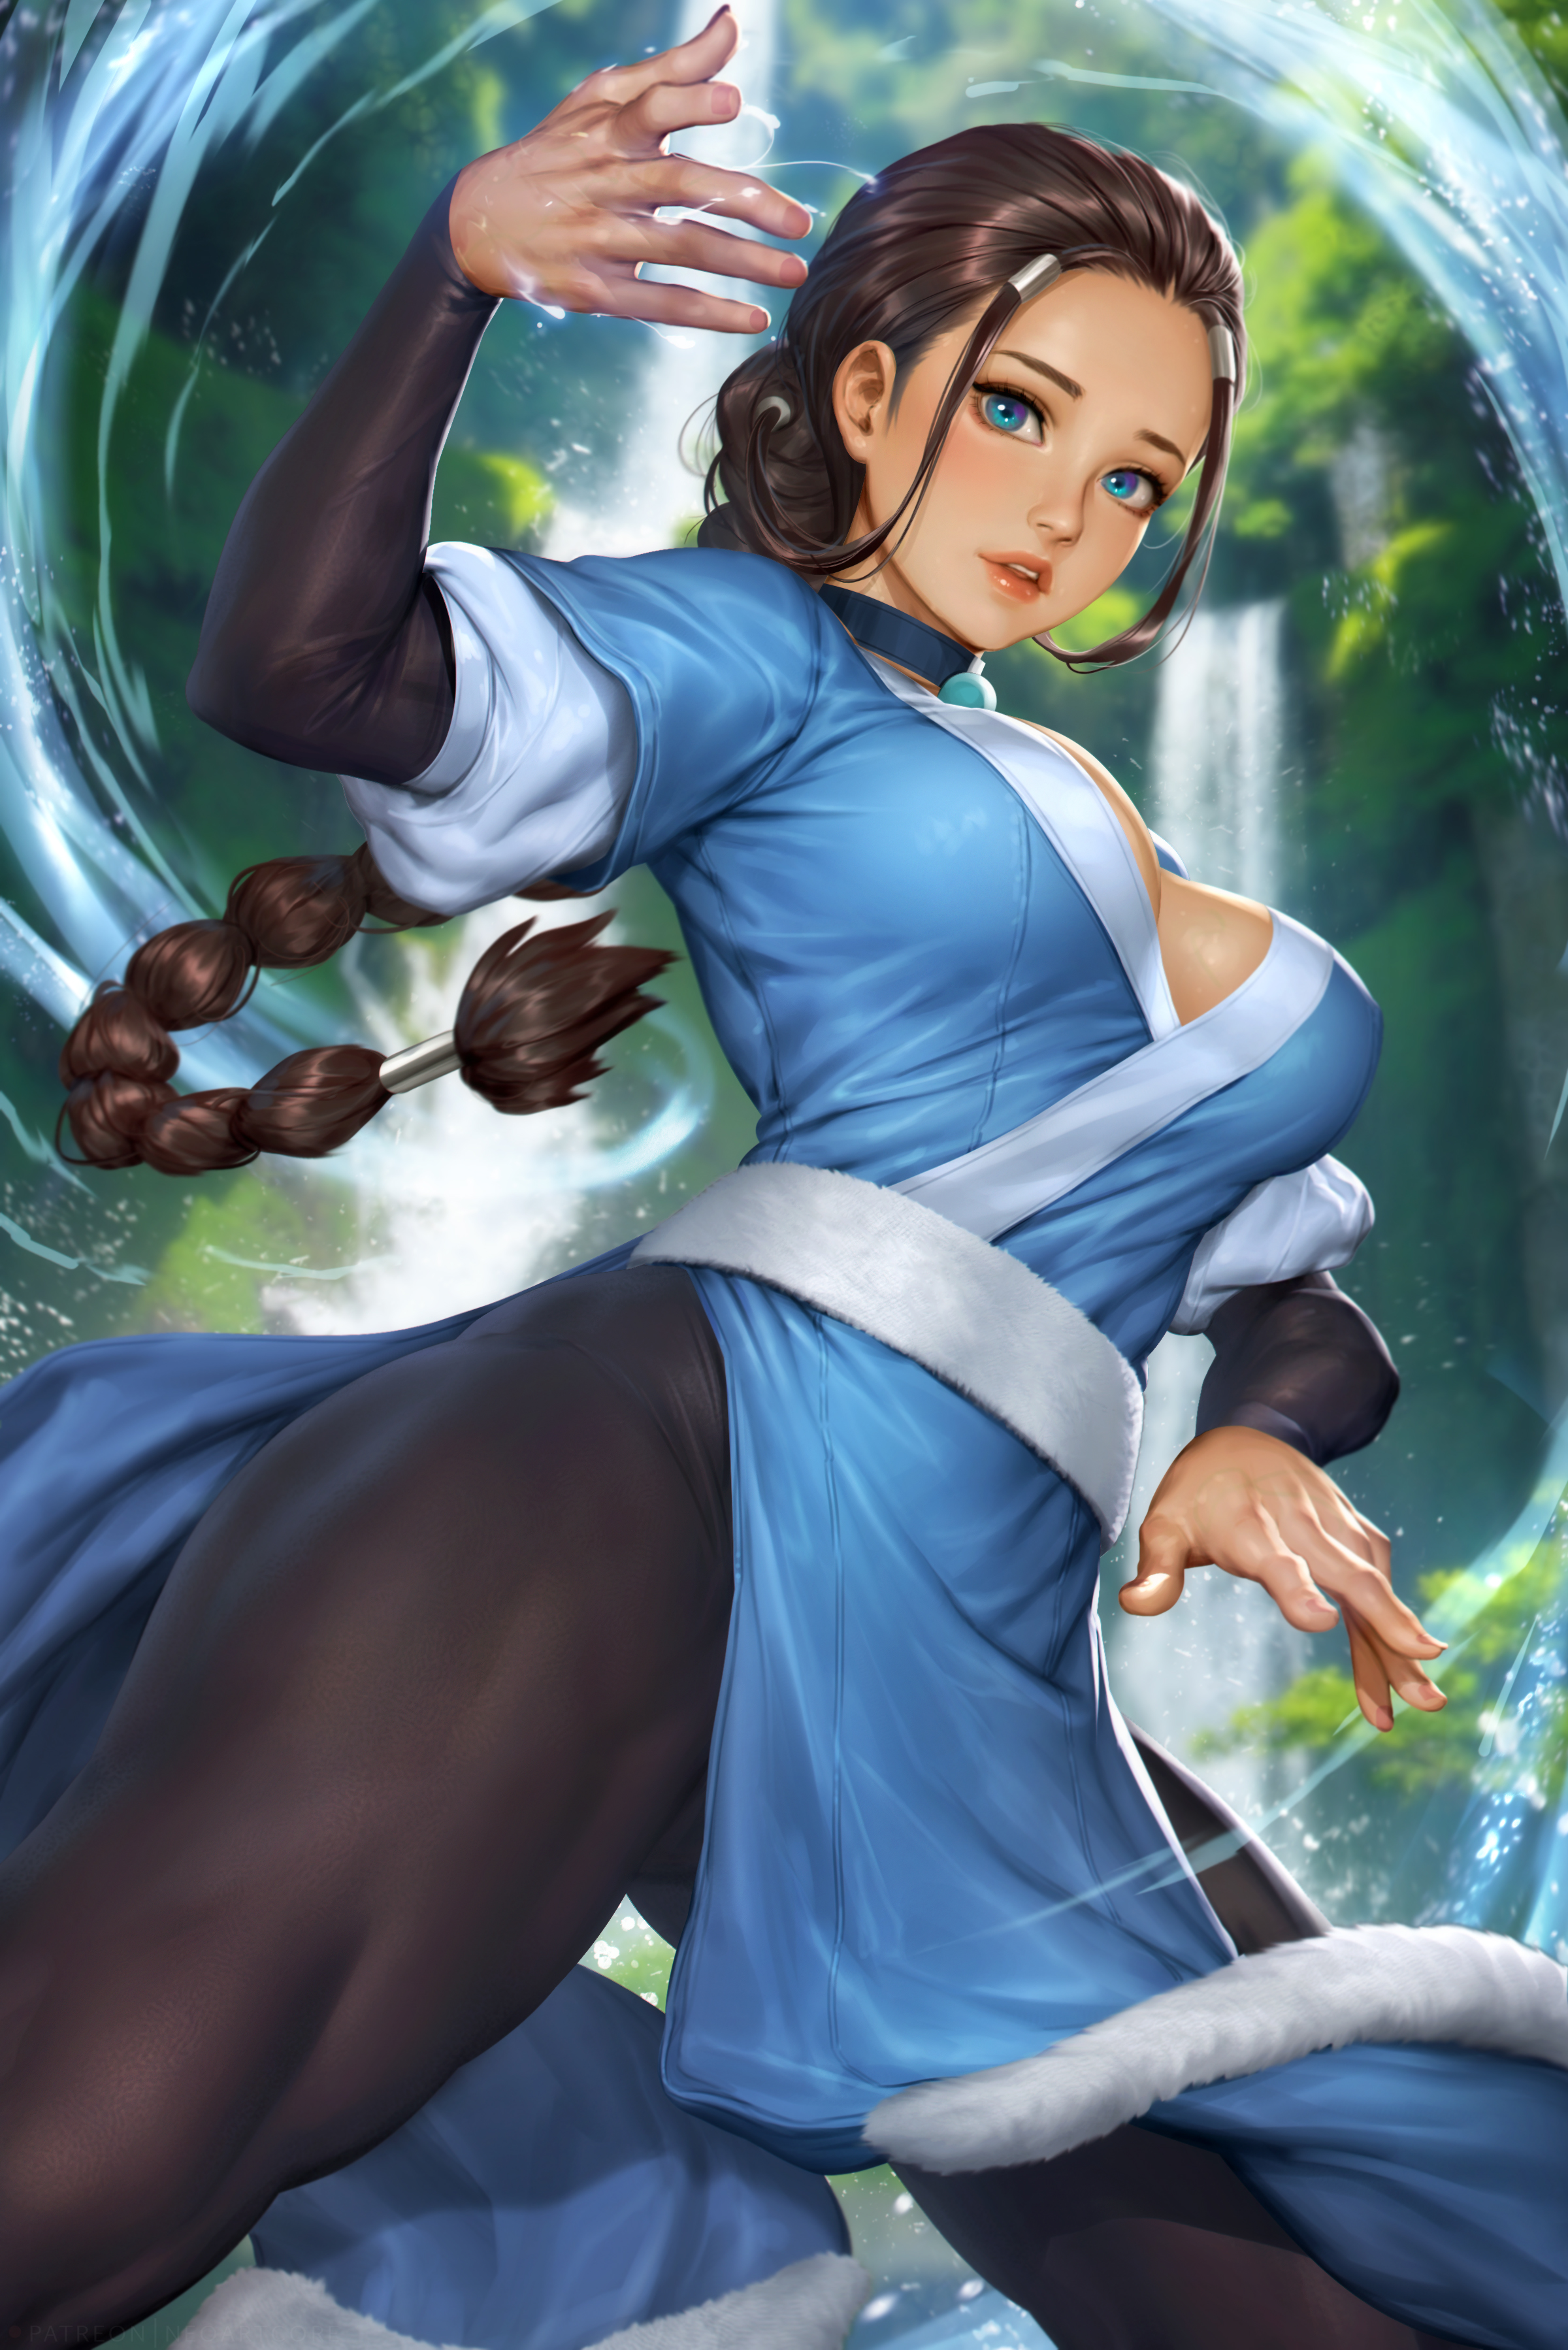 General 2400x3597 Katara Avatar: The Last Airbender Nickelodeon artwork drawing fan art fictional character NeoArtCorE (artist) blue eyes brunette long hair braids big boobs thick thigh choker arm warmers Chinese clothing looking at viewer women outdoors blurry background water waterfall depth of field portrait display ponytail